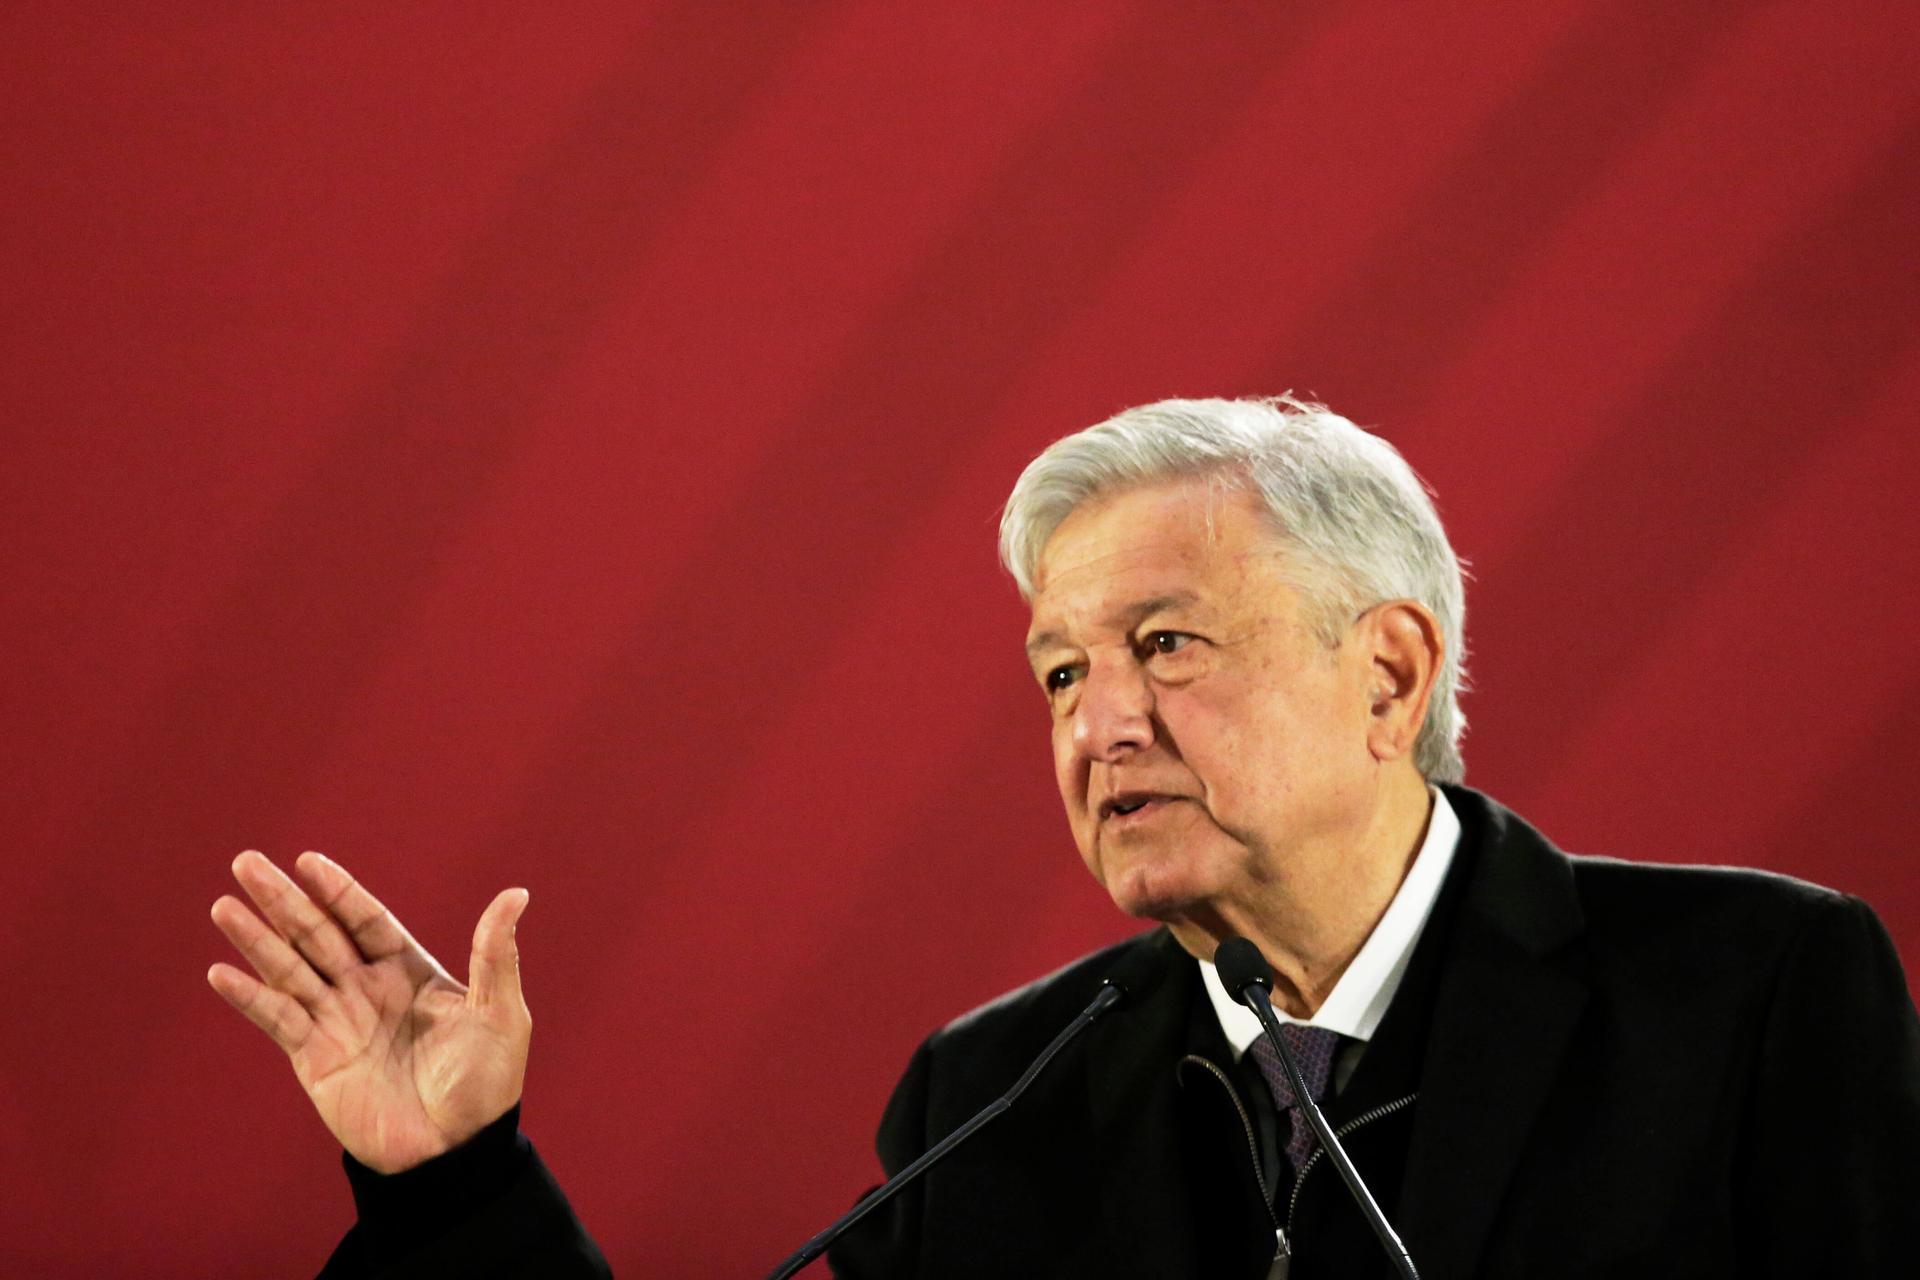 Mexico's President Andres Manuel Lopez Obrador gesturing in front of a red background